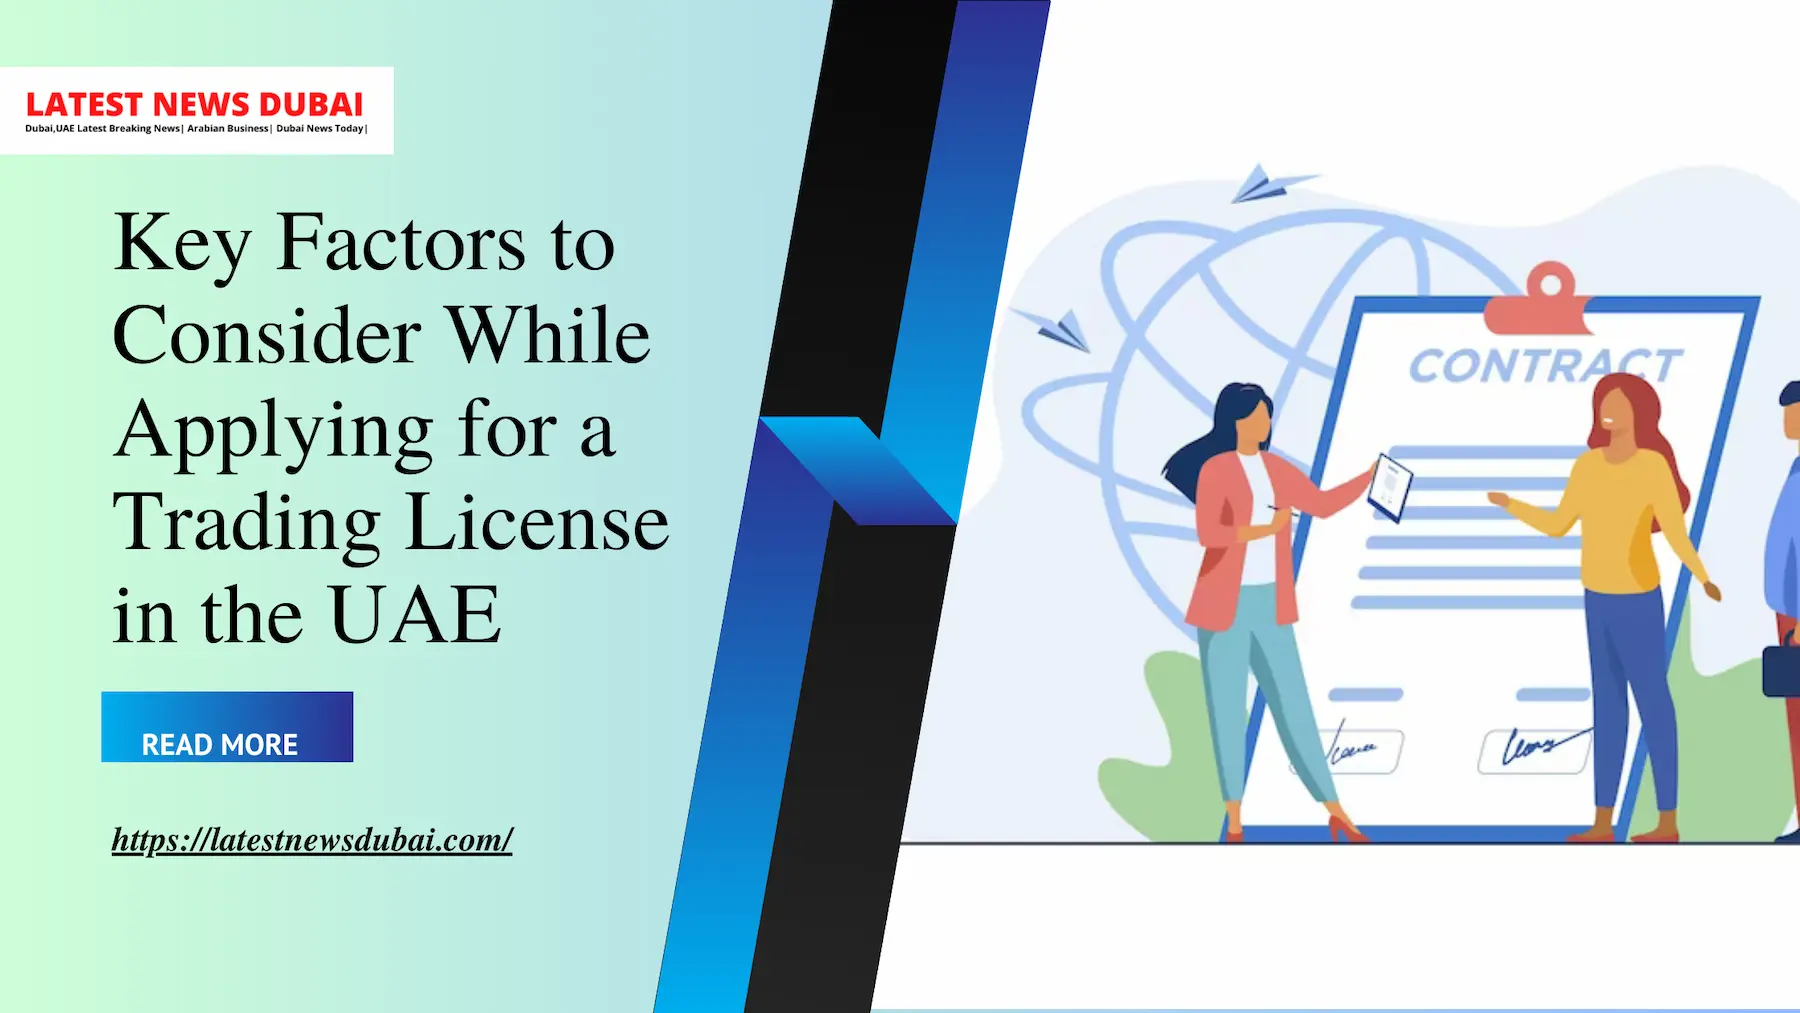 Applying for a Trading License in the UAE